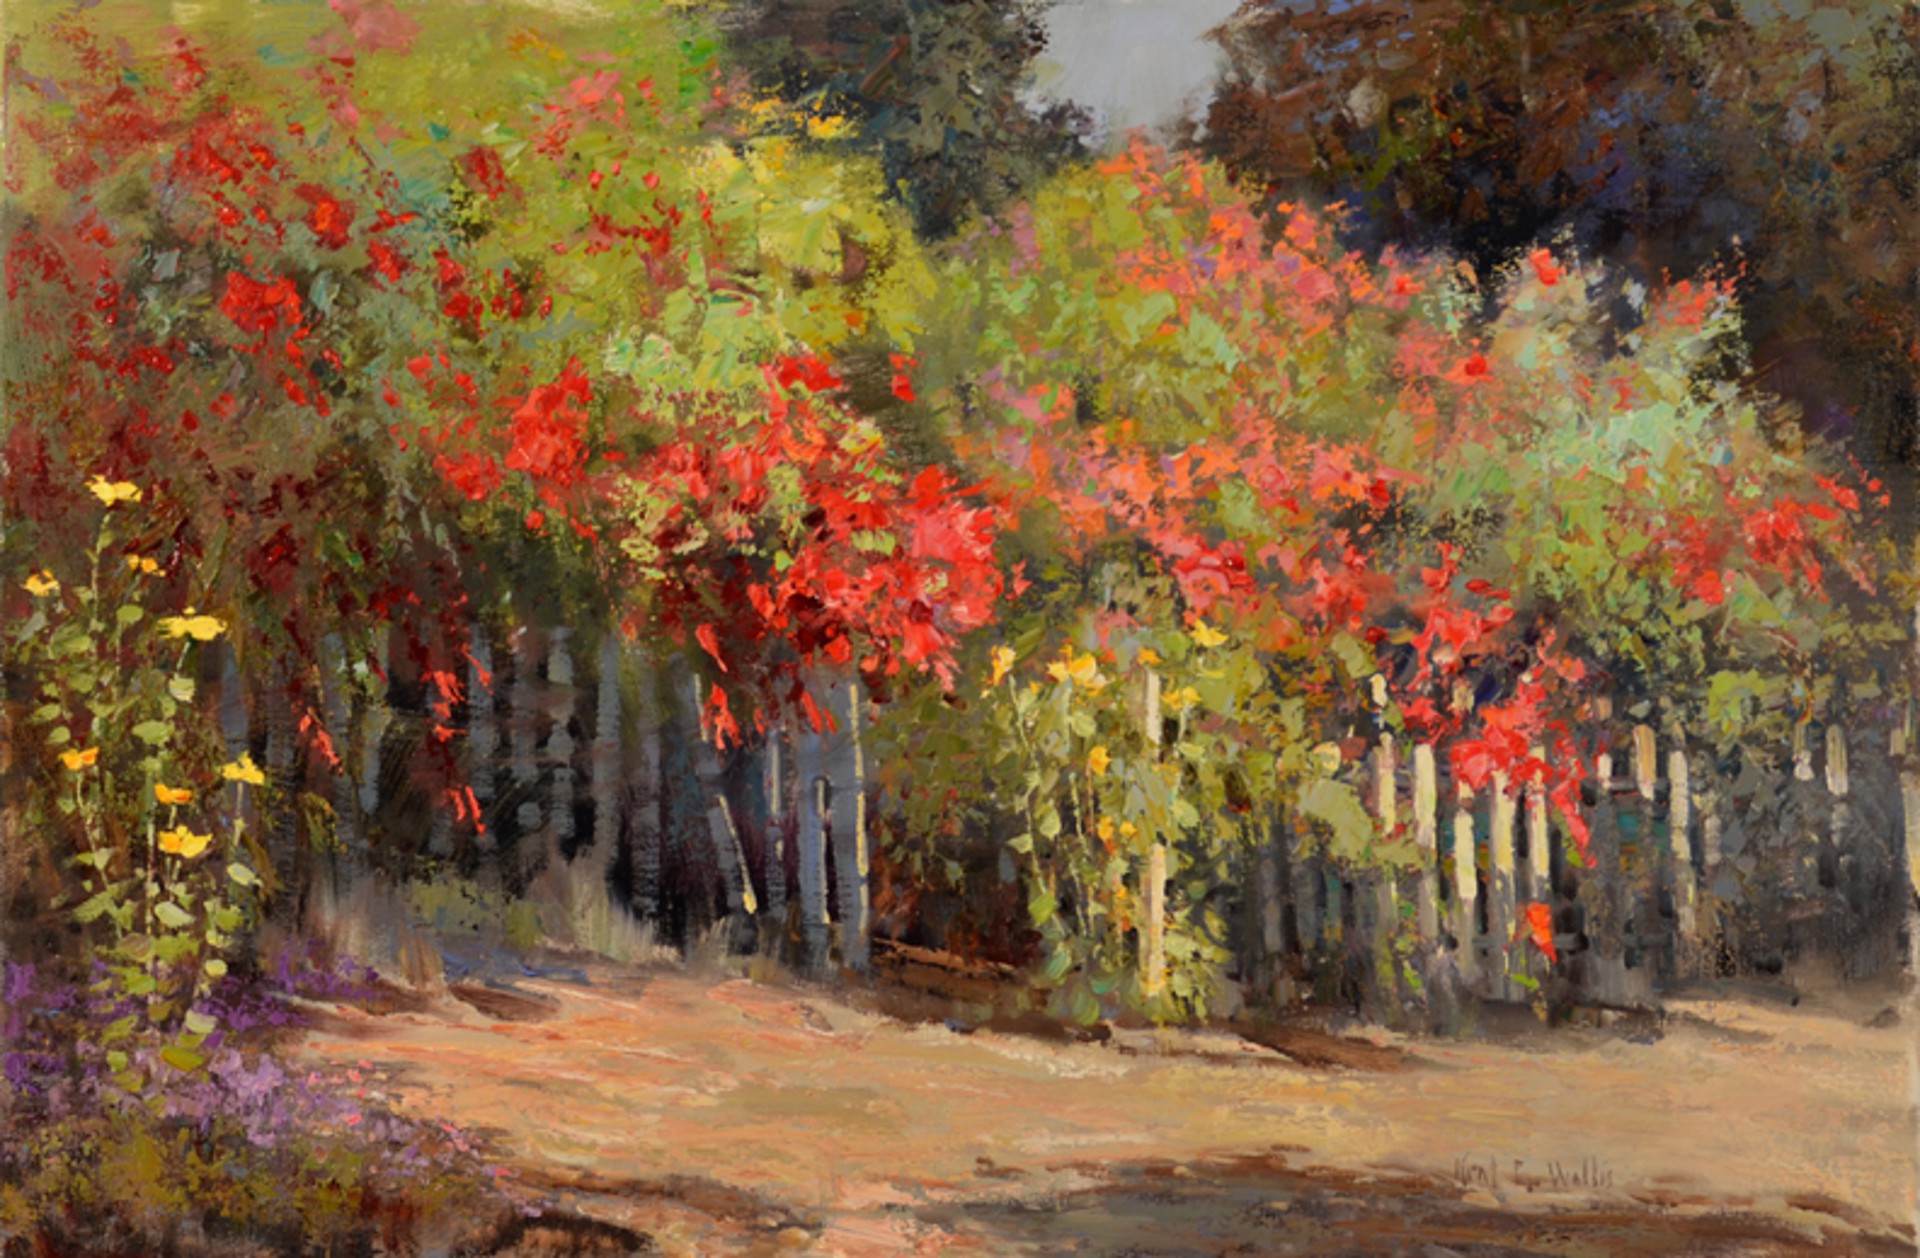 Richly Ornamented by Kent R. Wallis